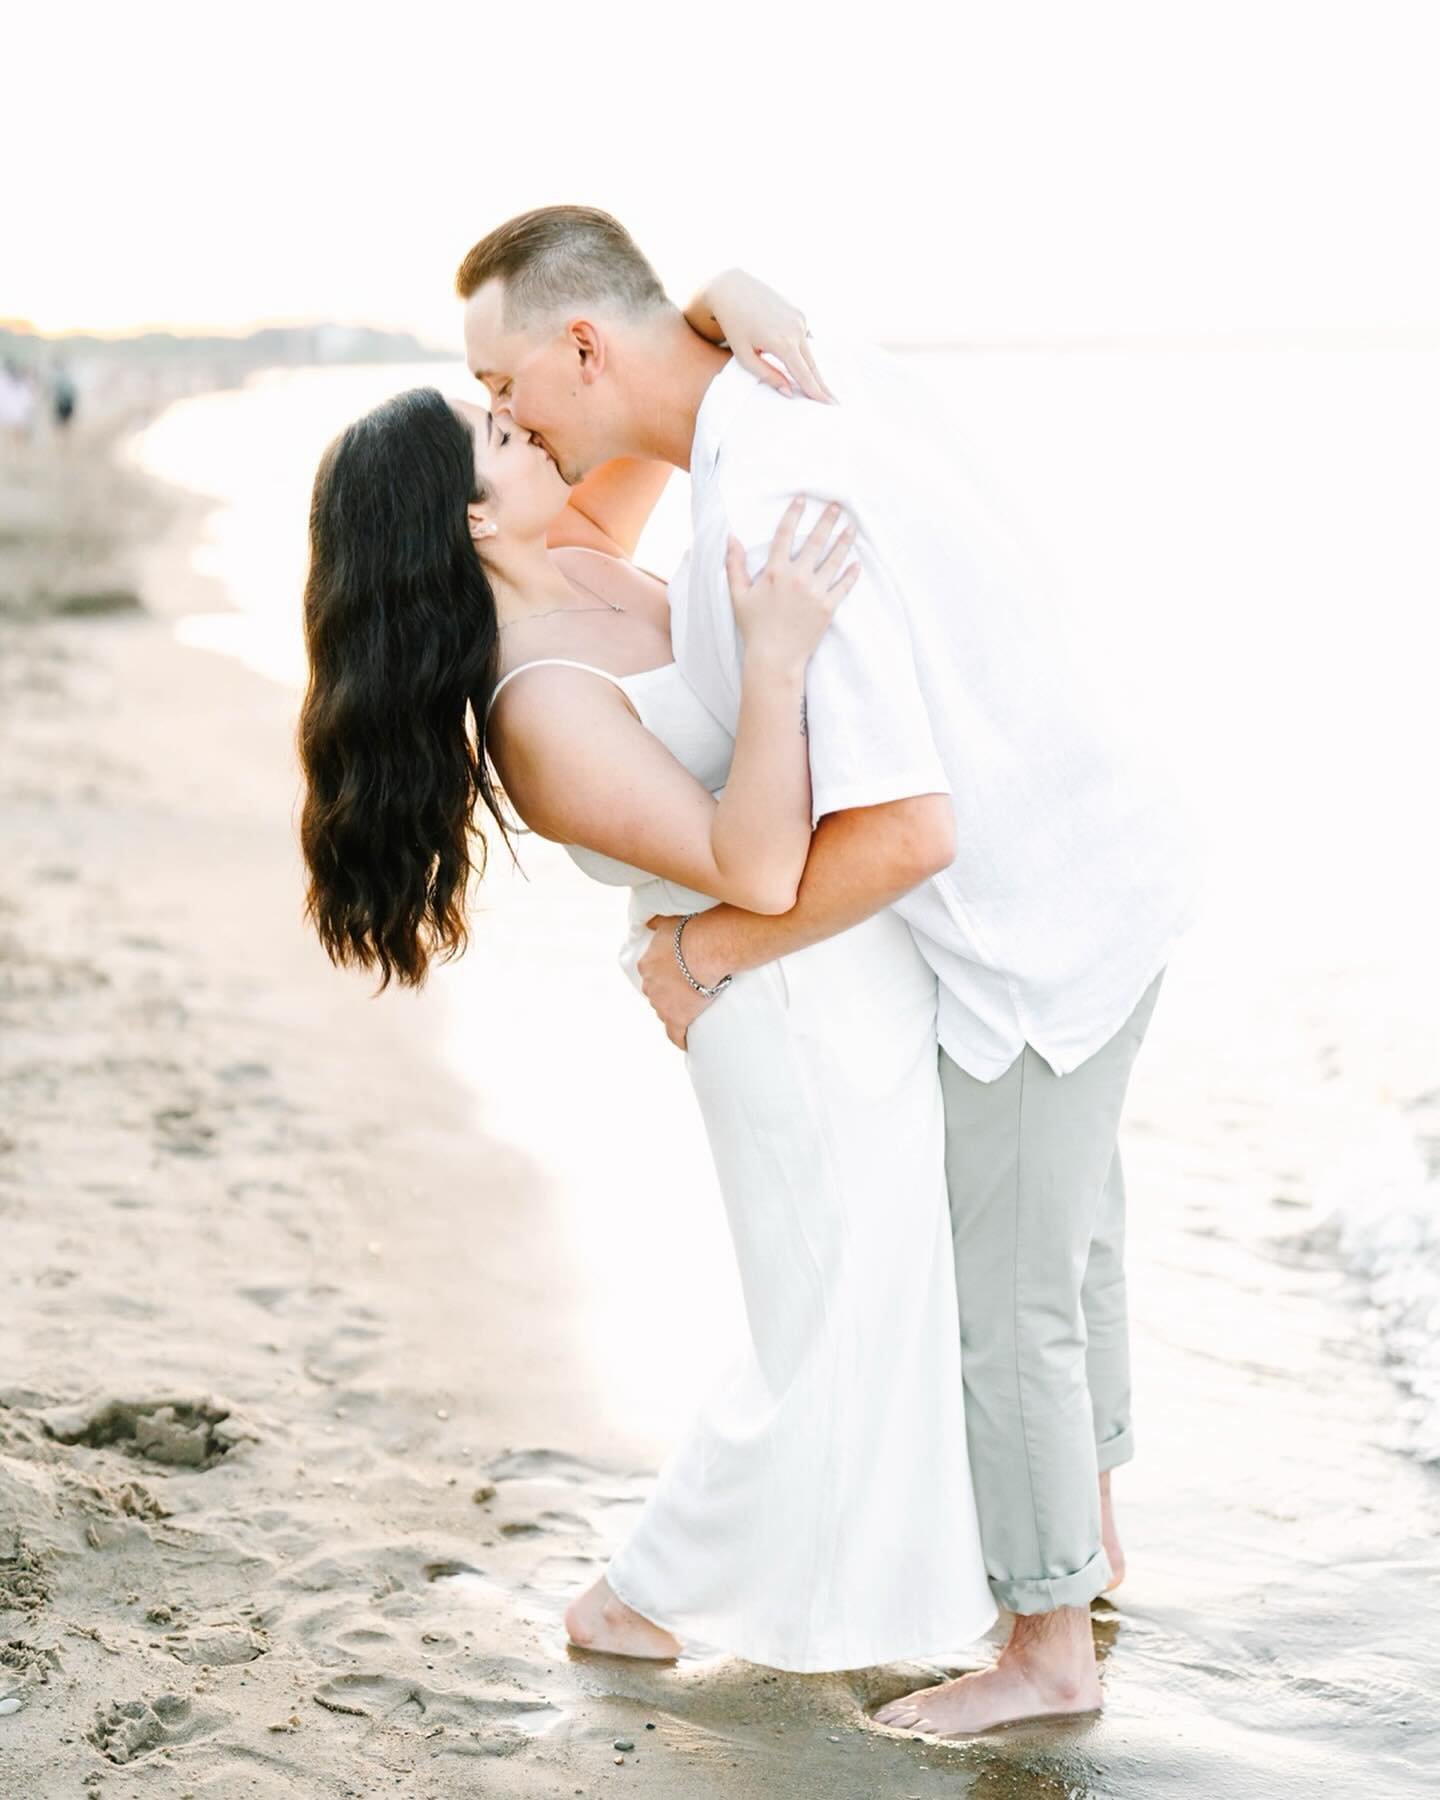 Gillson Beach with Jen &amp; Matt 😍

I&rsquo;m absolutely smitten with lakeside summer Engagement Sessions. The weather and that golden hour glow were almost as wonderful as these two kind and genuine lovebirds. We love our couples so much. 🥰 Canno